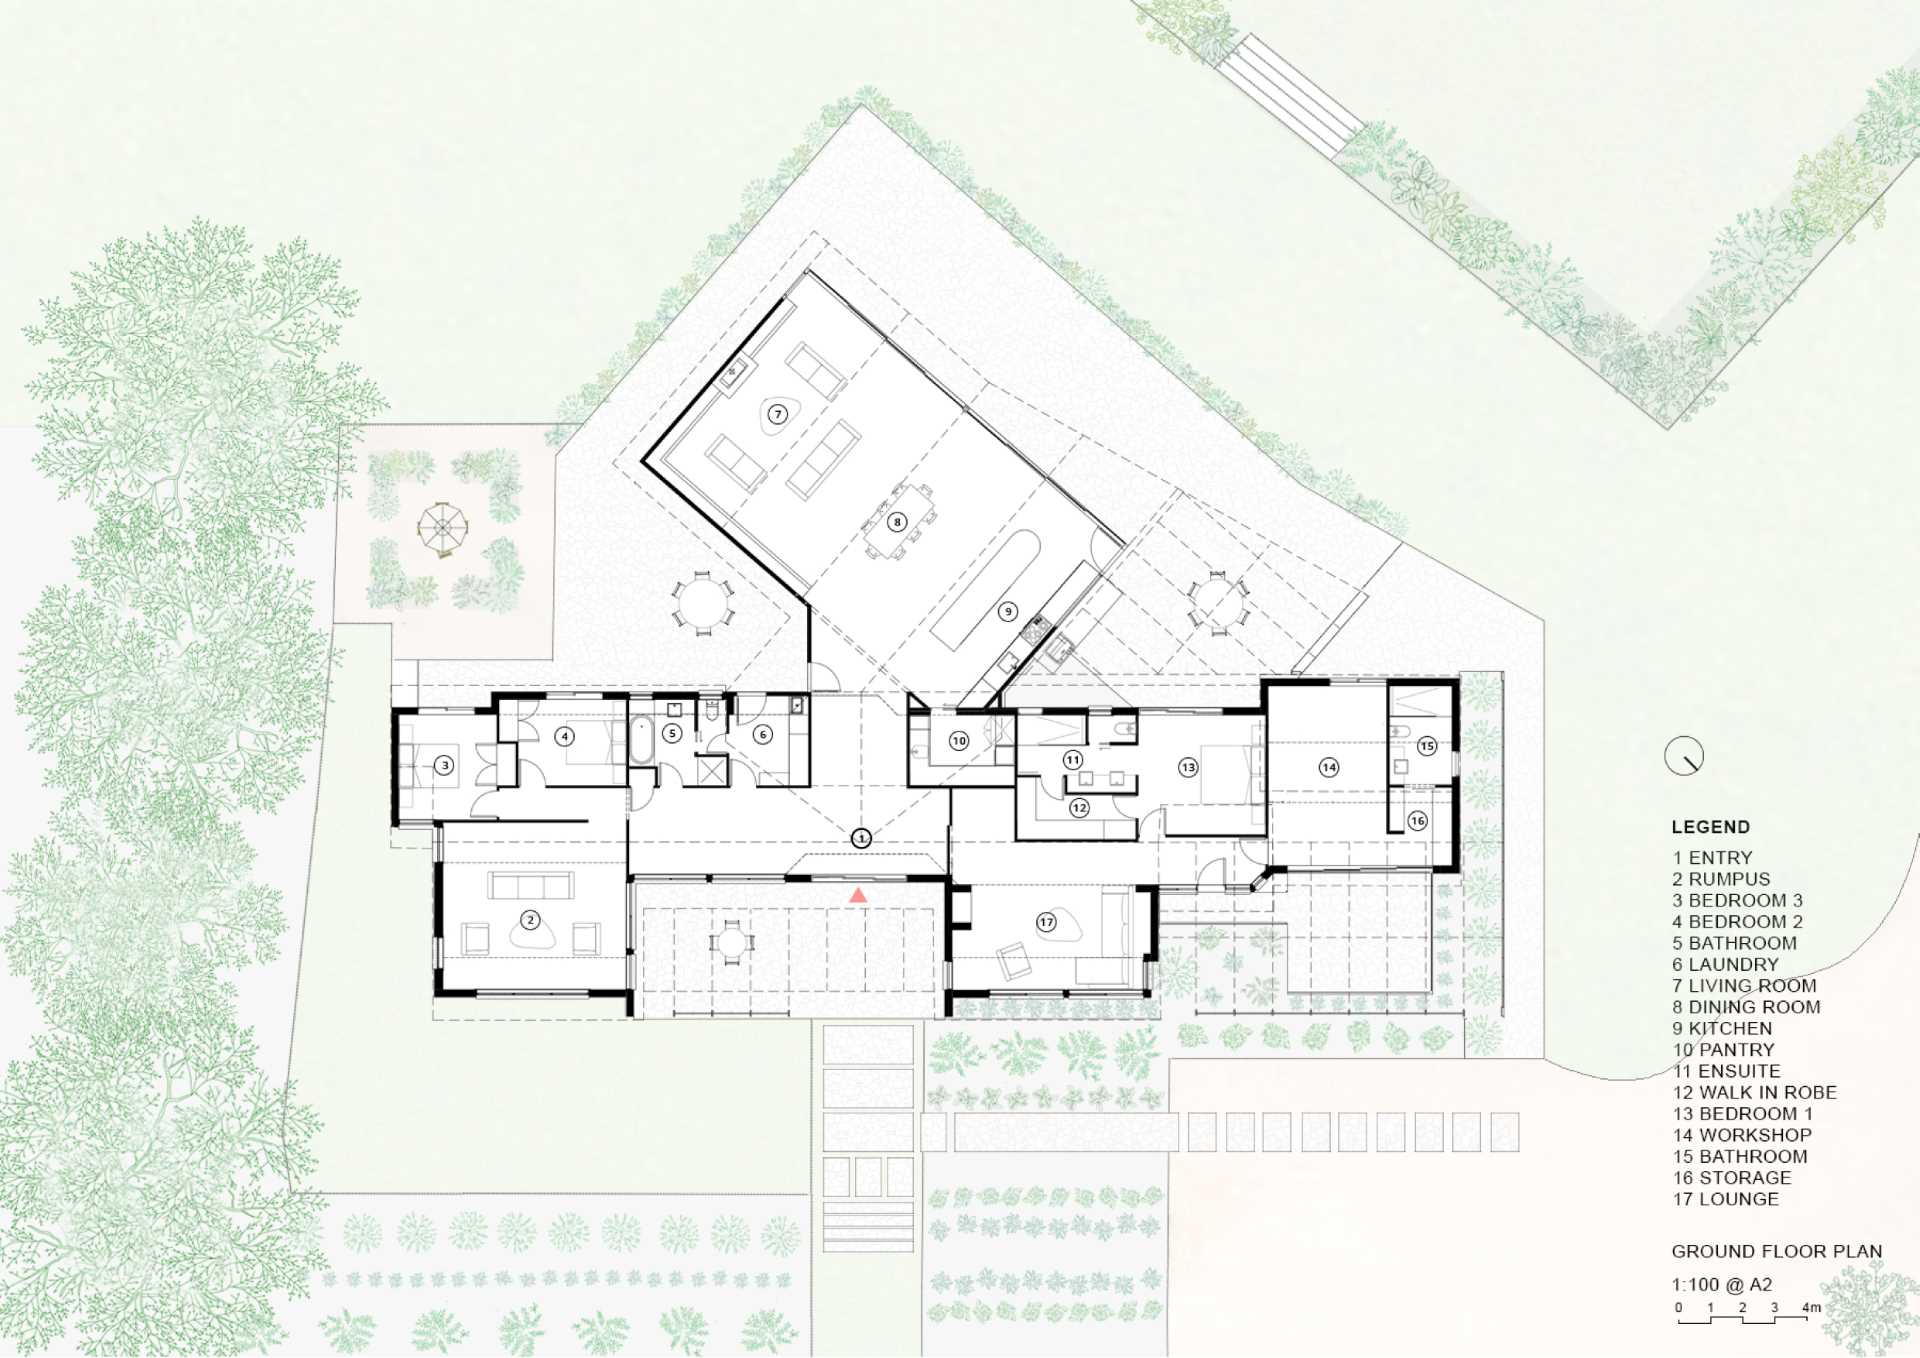 The floor plan of a remodeled modern farm house.